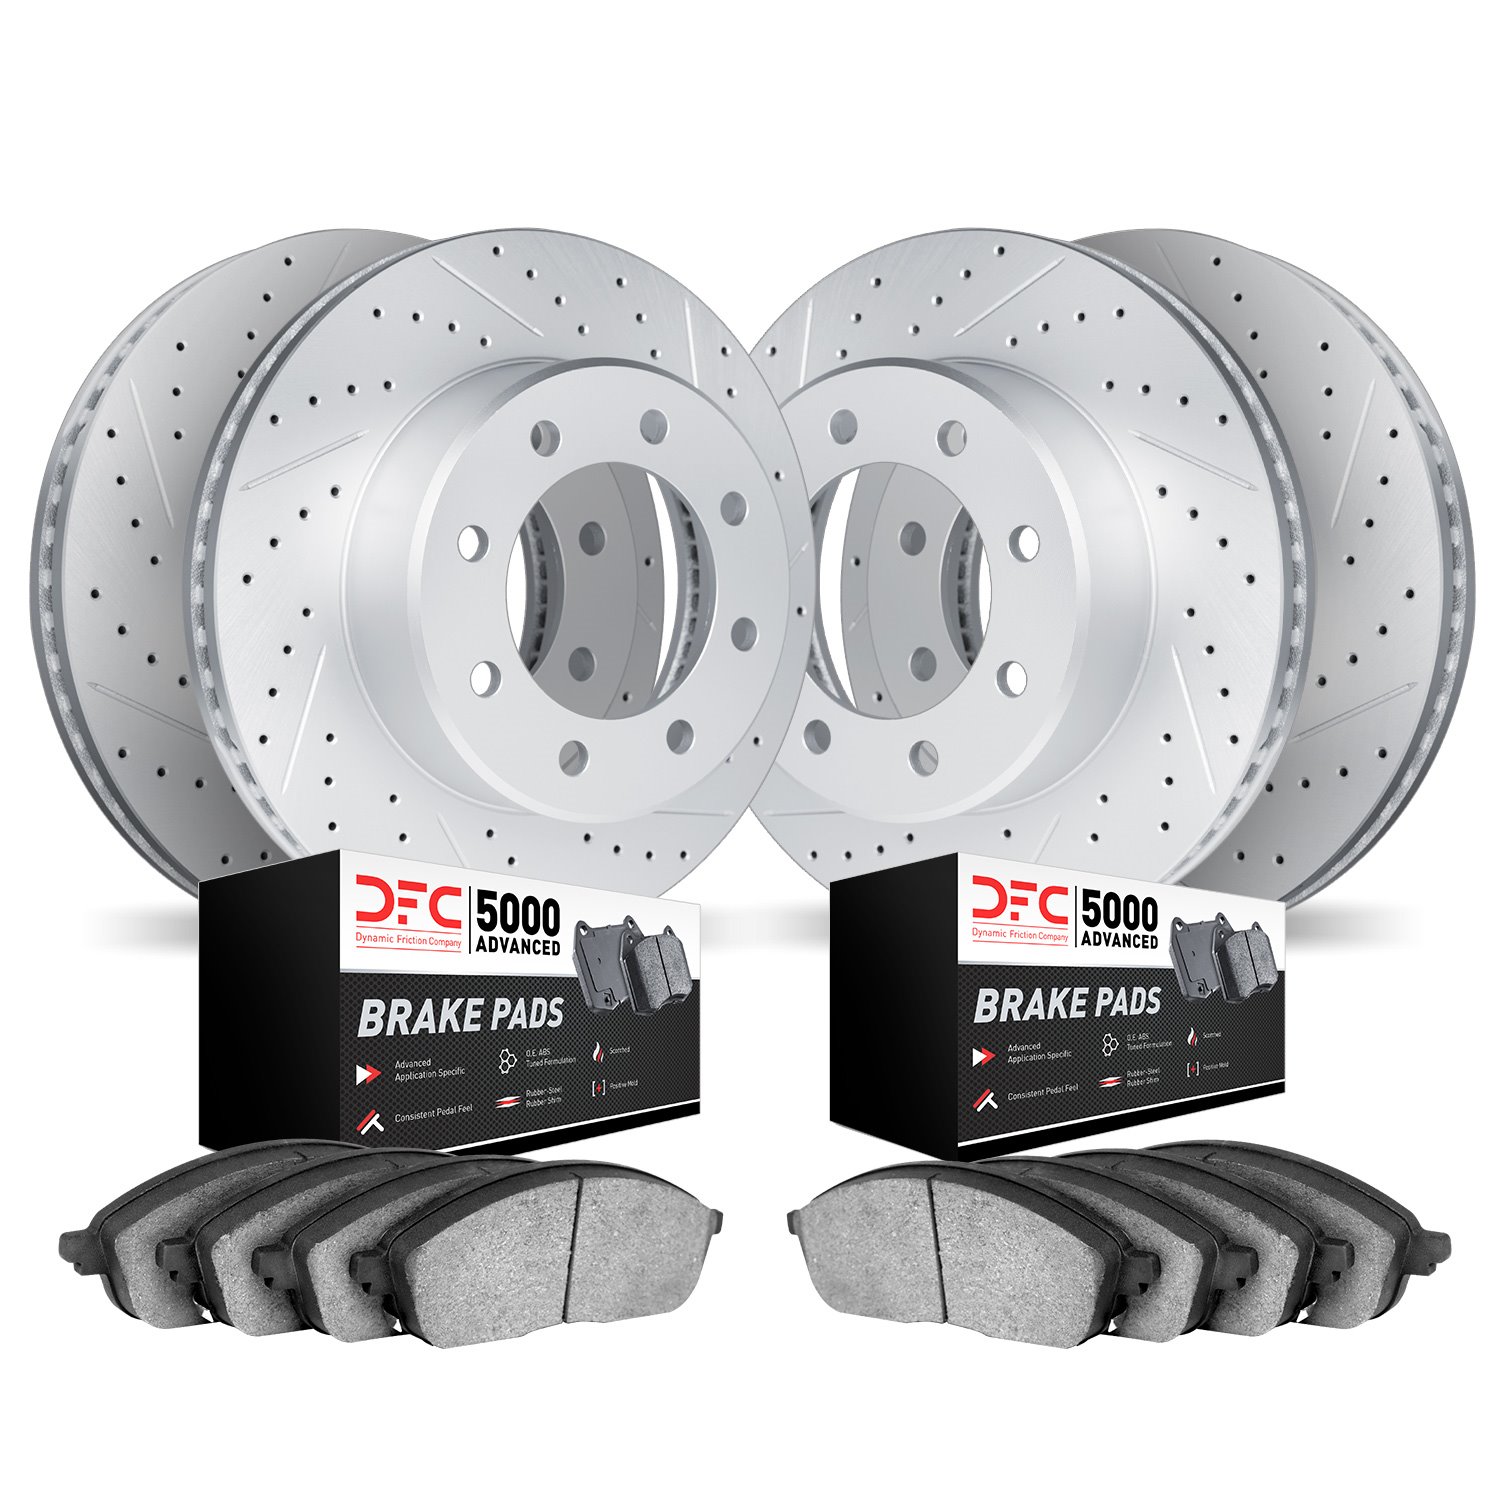 2504-48039 Geoperformance Drilled/Slotted Rotors w/5000 Advanced Brake Pads Kit, 2018-2020 GM, Position: Front and Rear